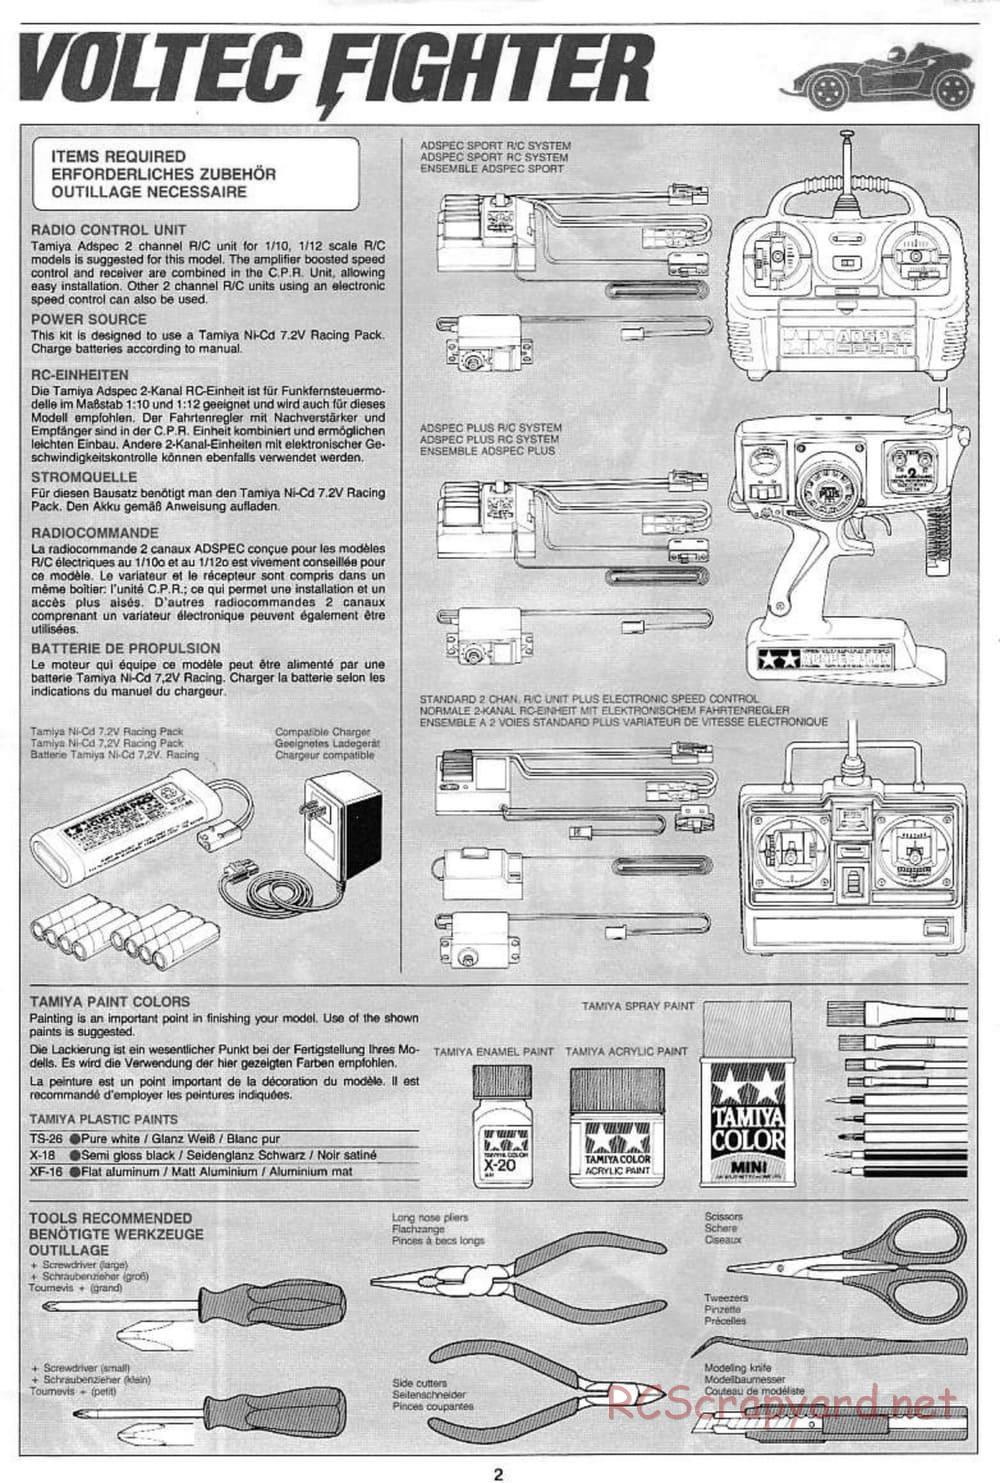 Tamiya - Voltec Fighter - Boy's 4WD Chassis - Manual - Page 2